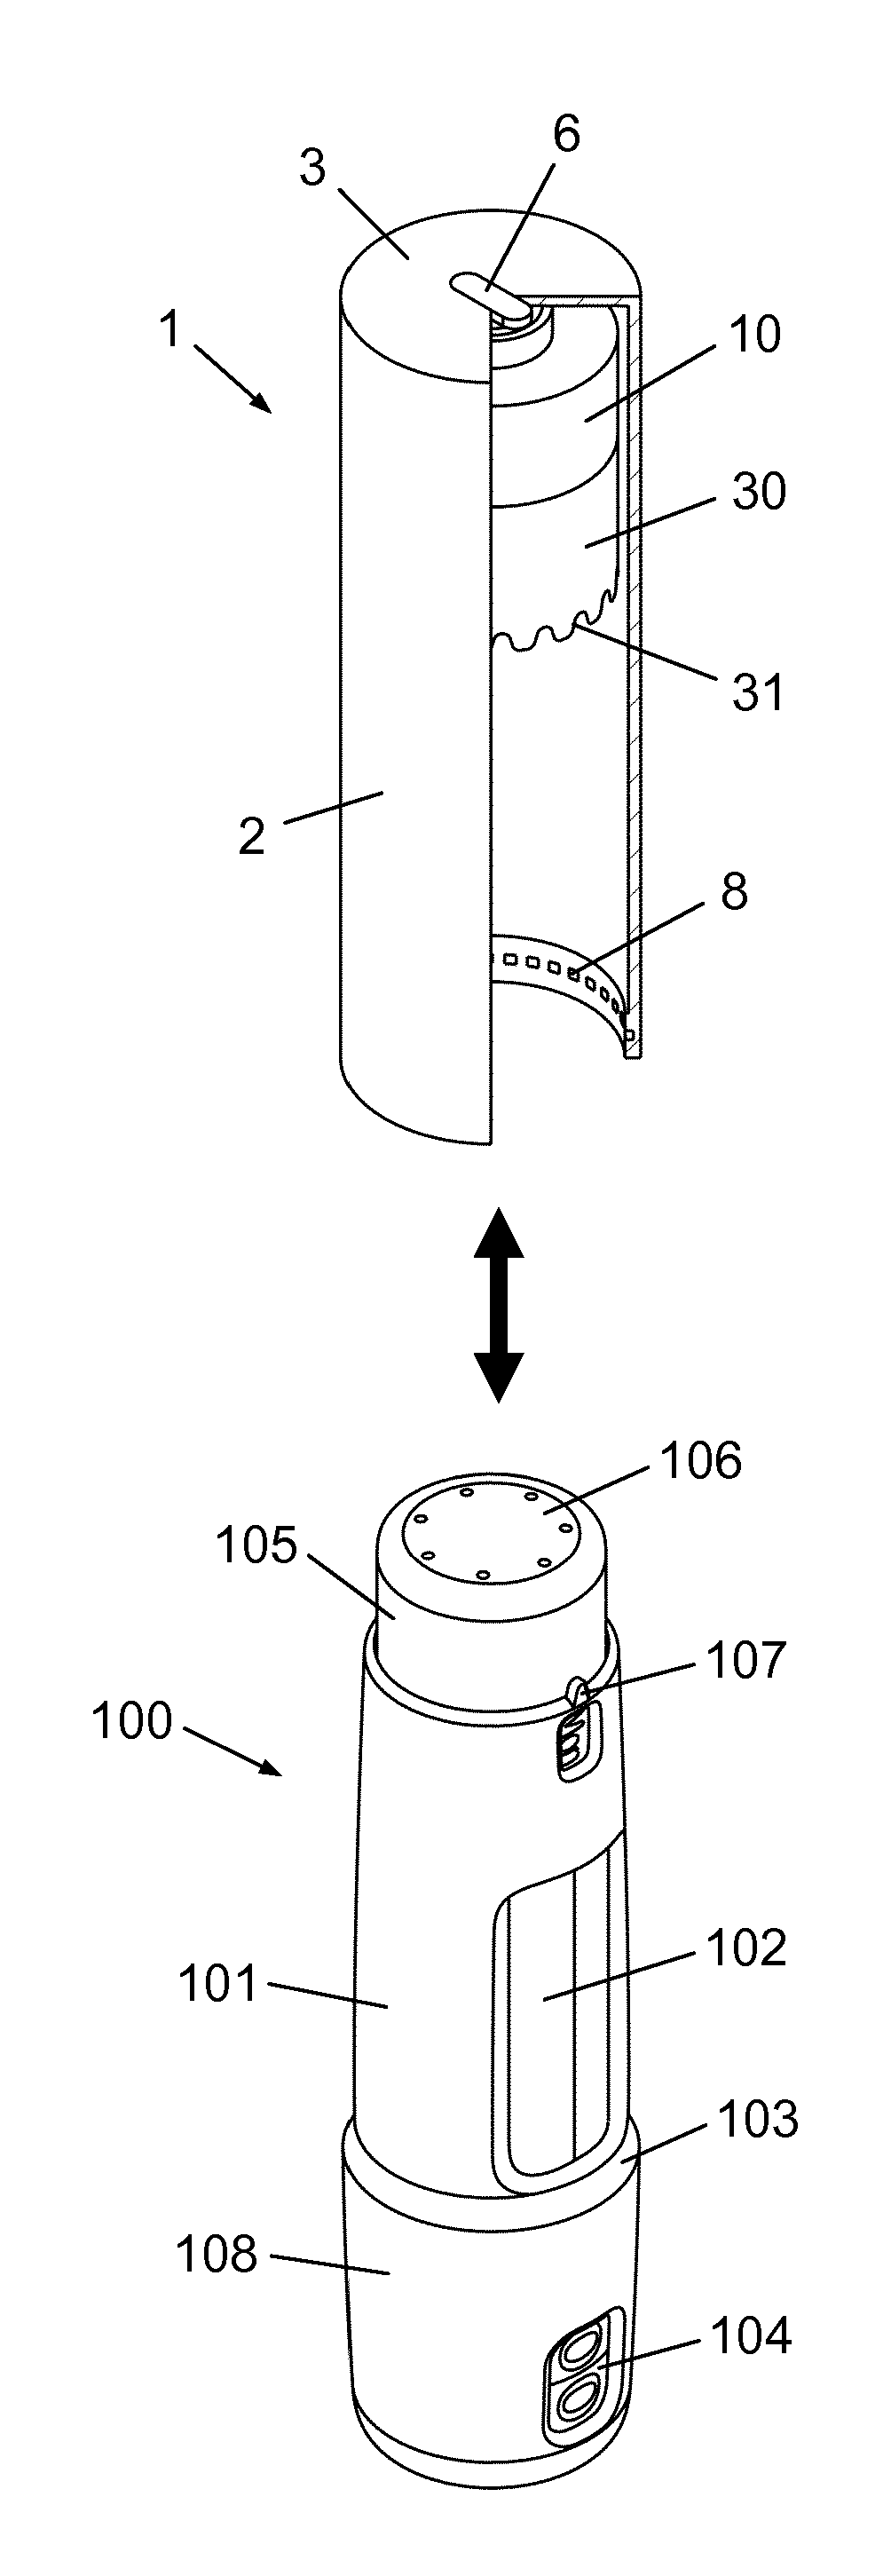 State changing appliance for a drug delivery device